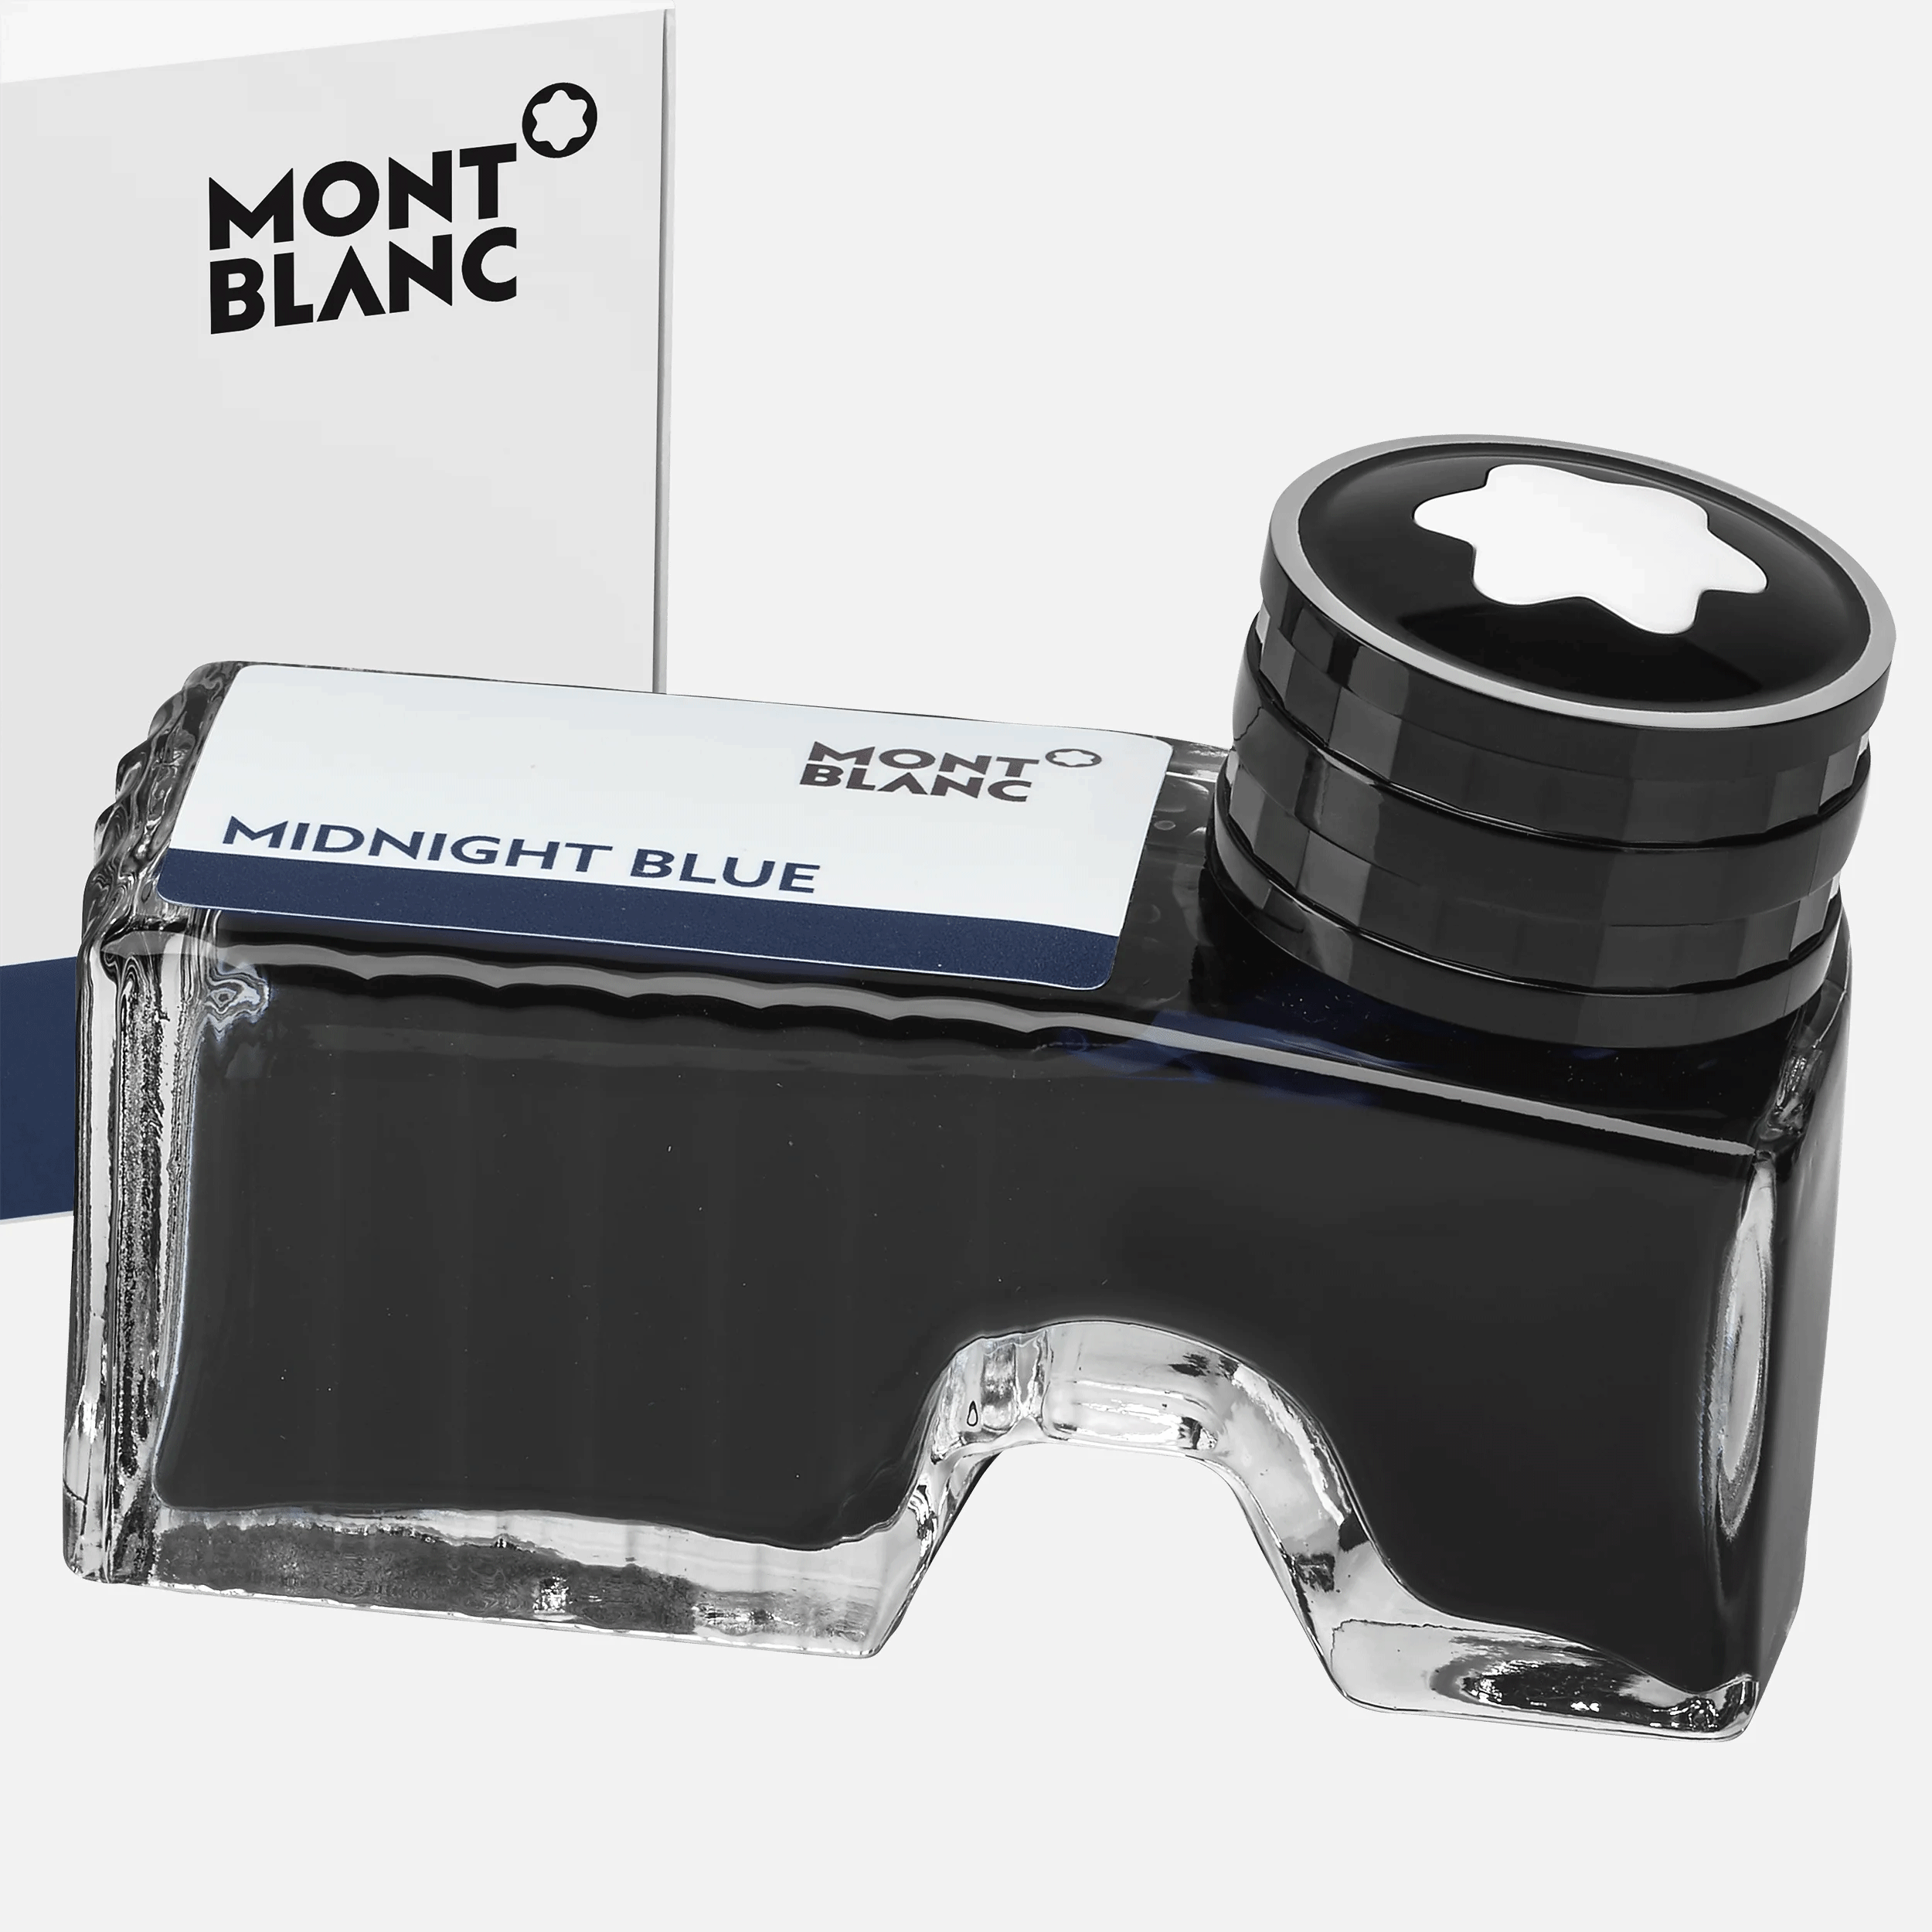 Montblanc Ink Bottle 60ml Midnight Blue - Pencraft the boutique